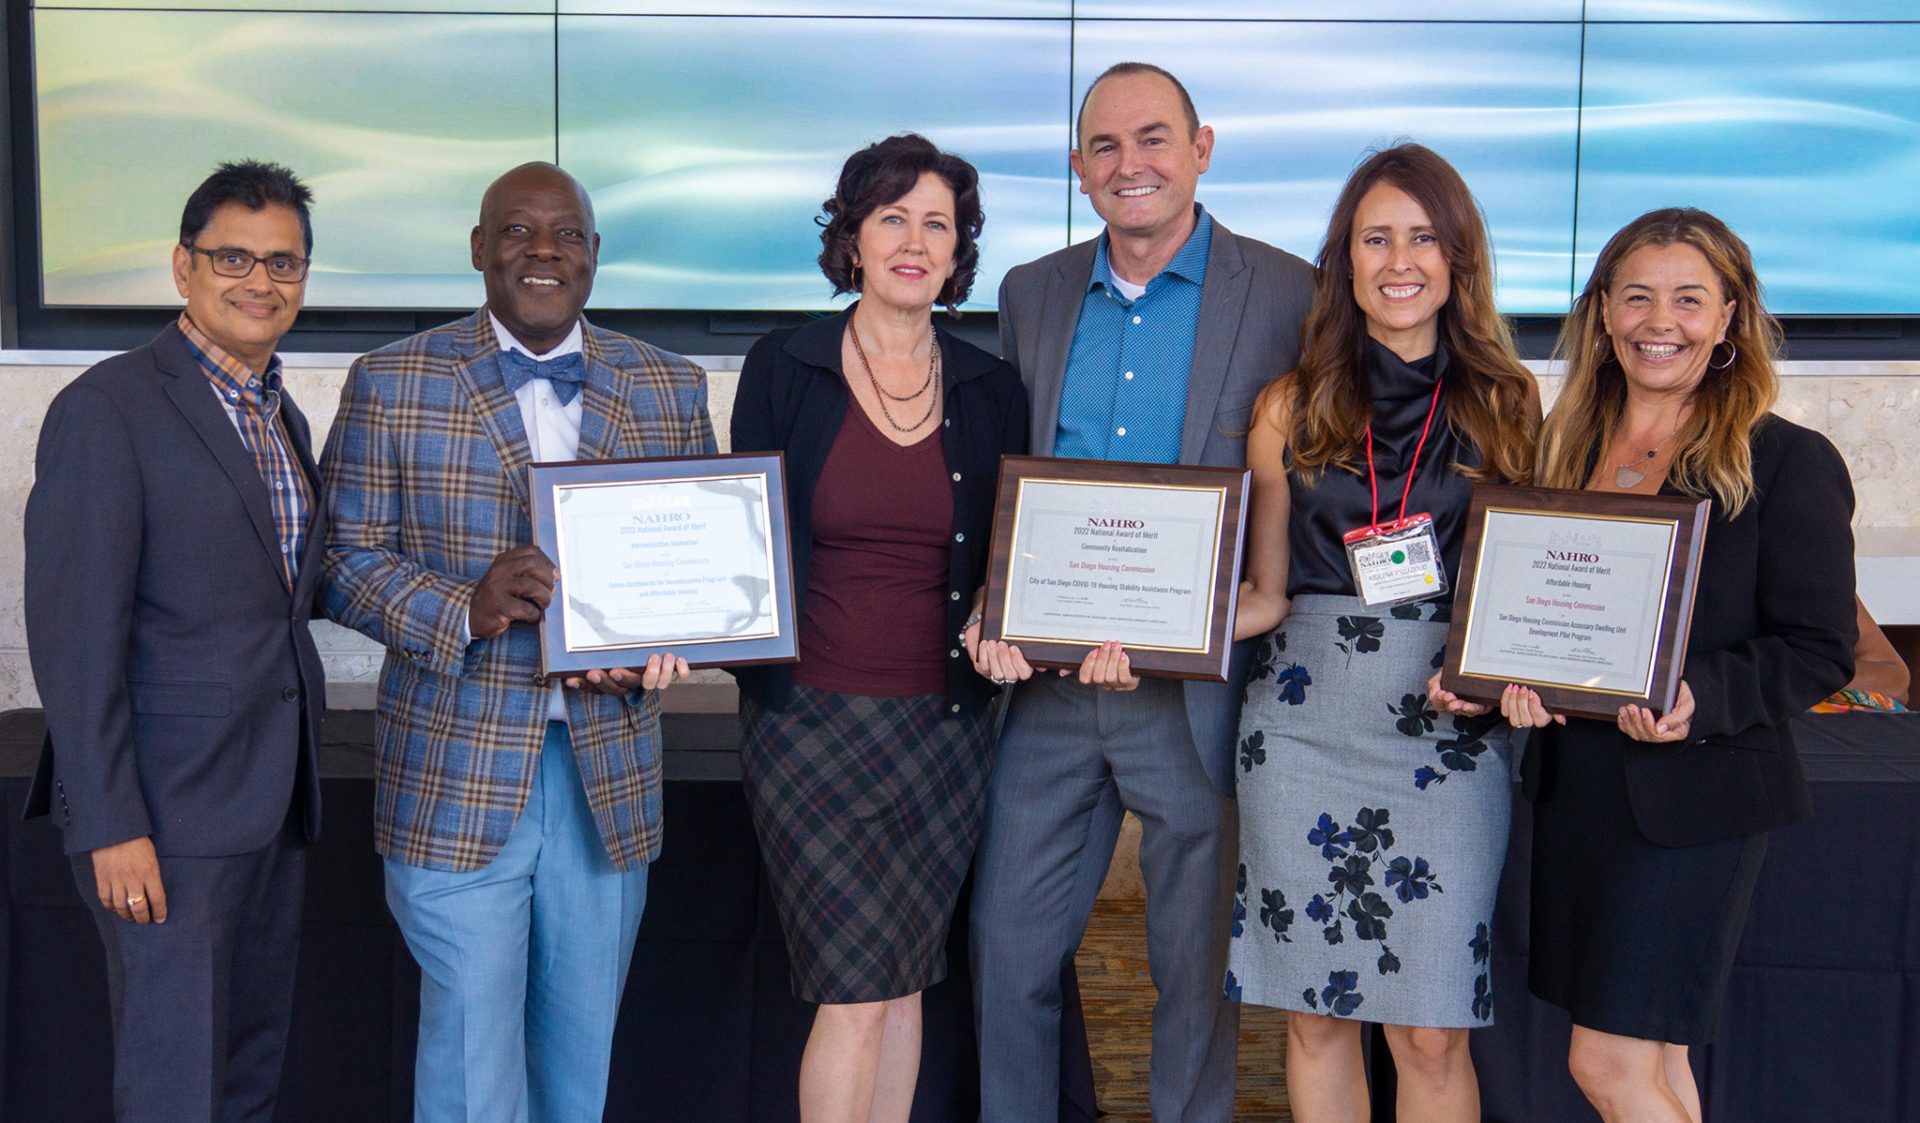 San Diego Housing Commission Receives National Awards for Affordable Housing, Community Revitalization and Administrative Innovation